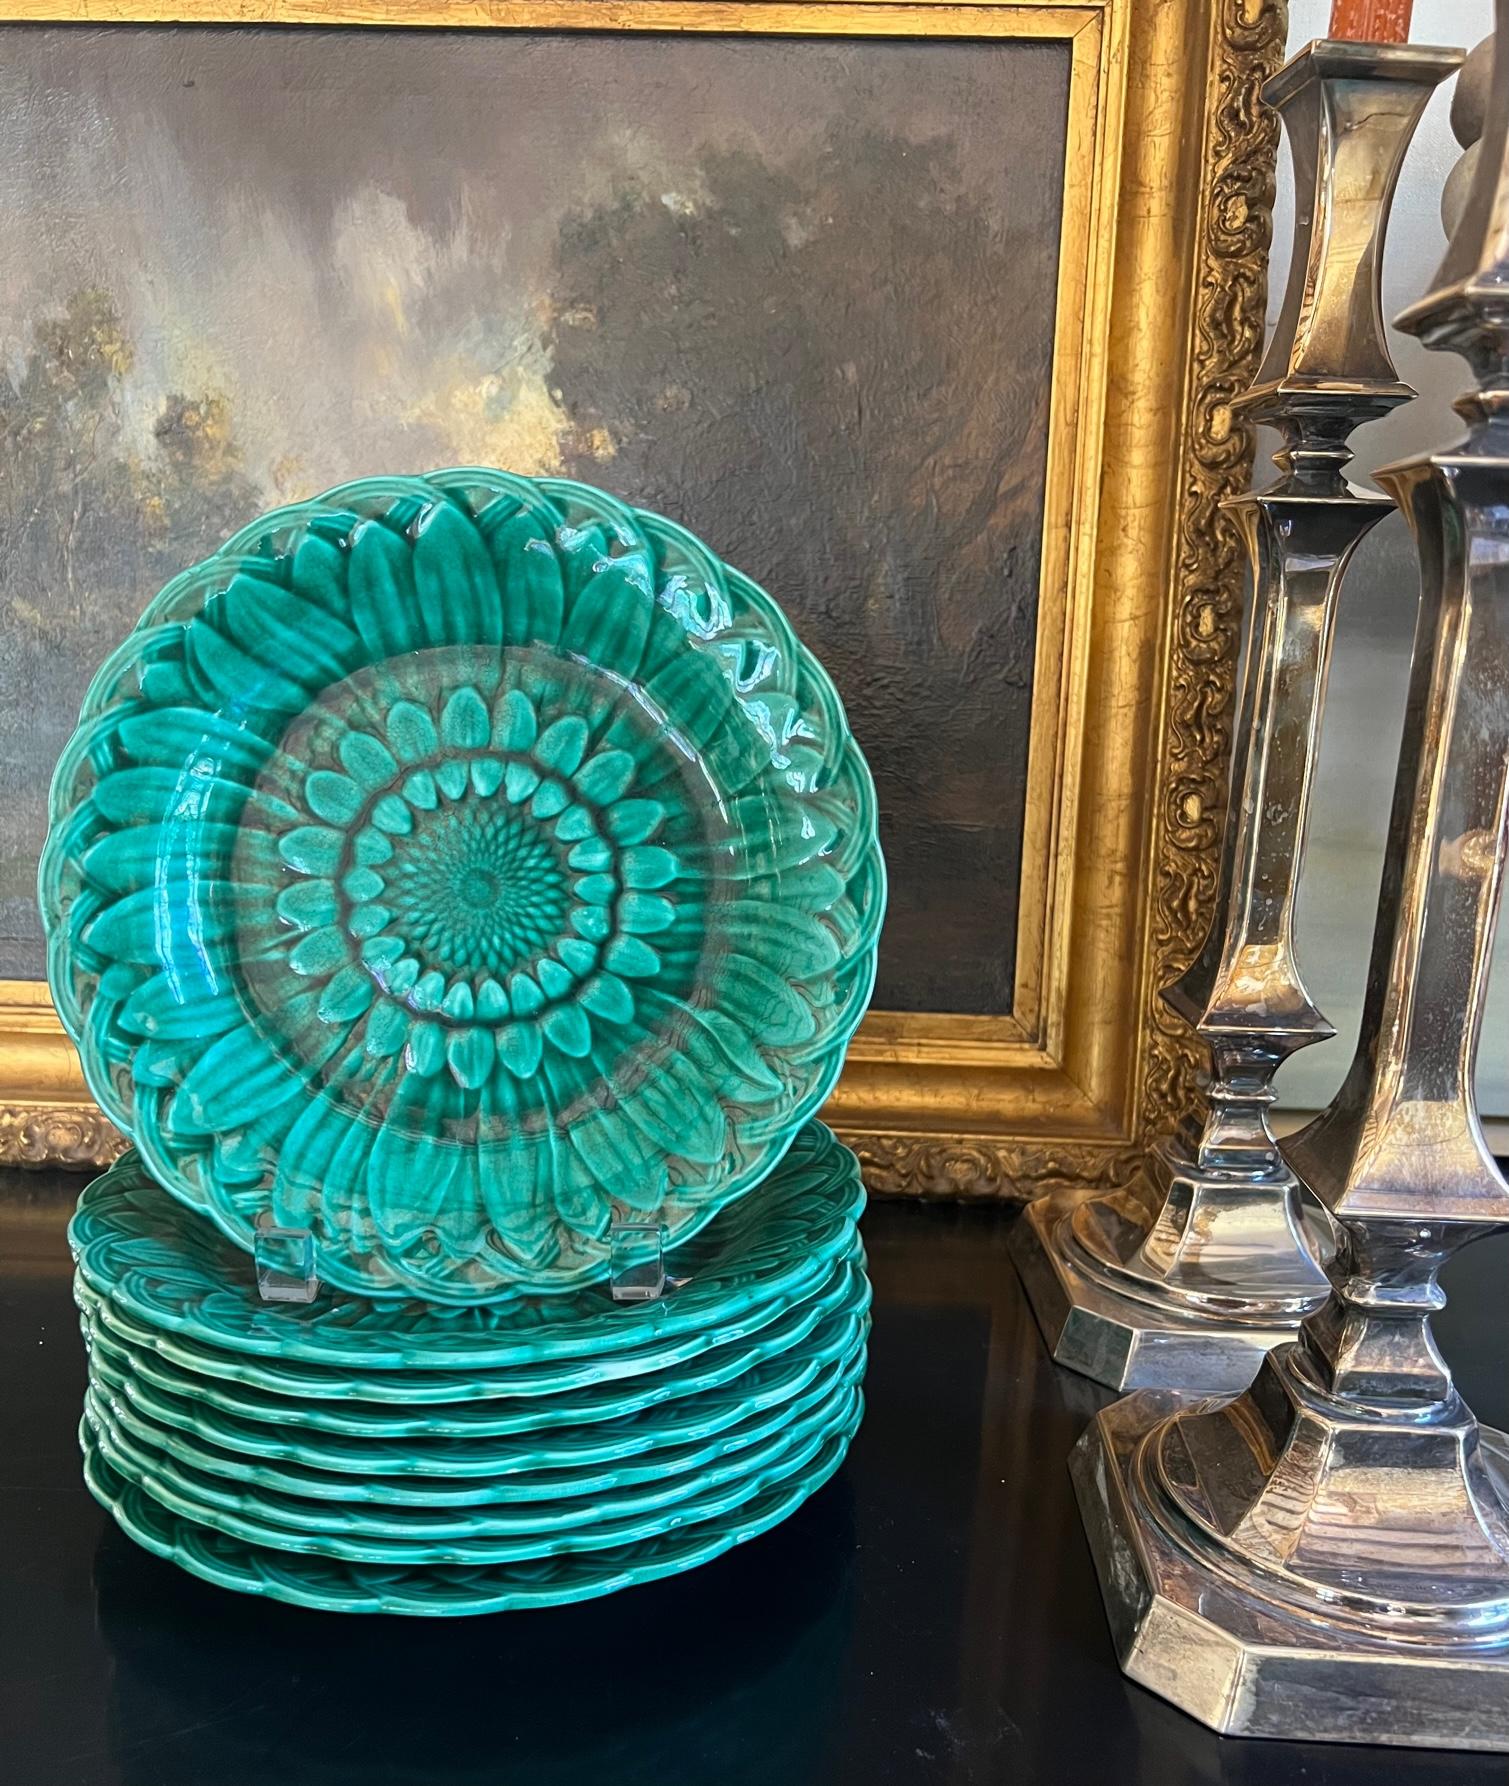 Vibrant green sunflower dinner plate made by Wedgwood in England in the 1920's. They have a basketweave pattern around a scalloped edge and each is stamped on the bottom. They look beautiful on your table or hanging on the wall.

They are sold